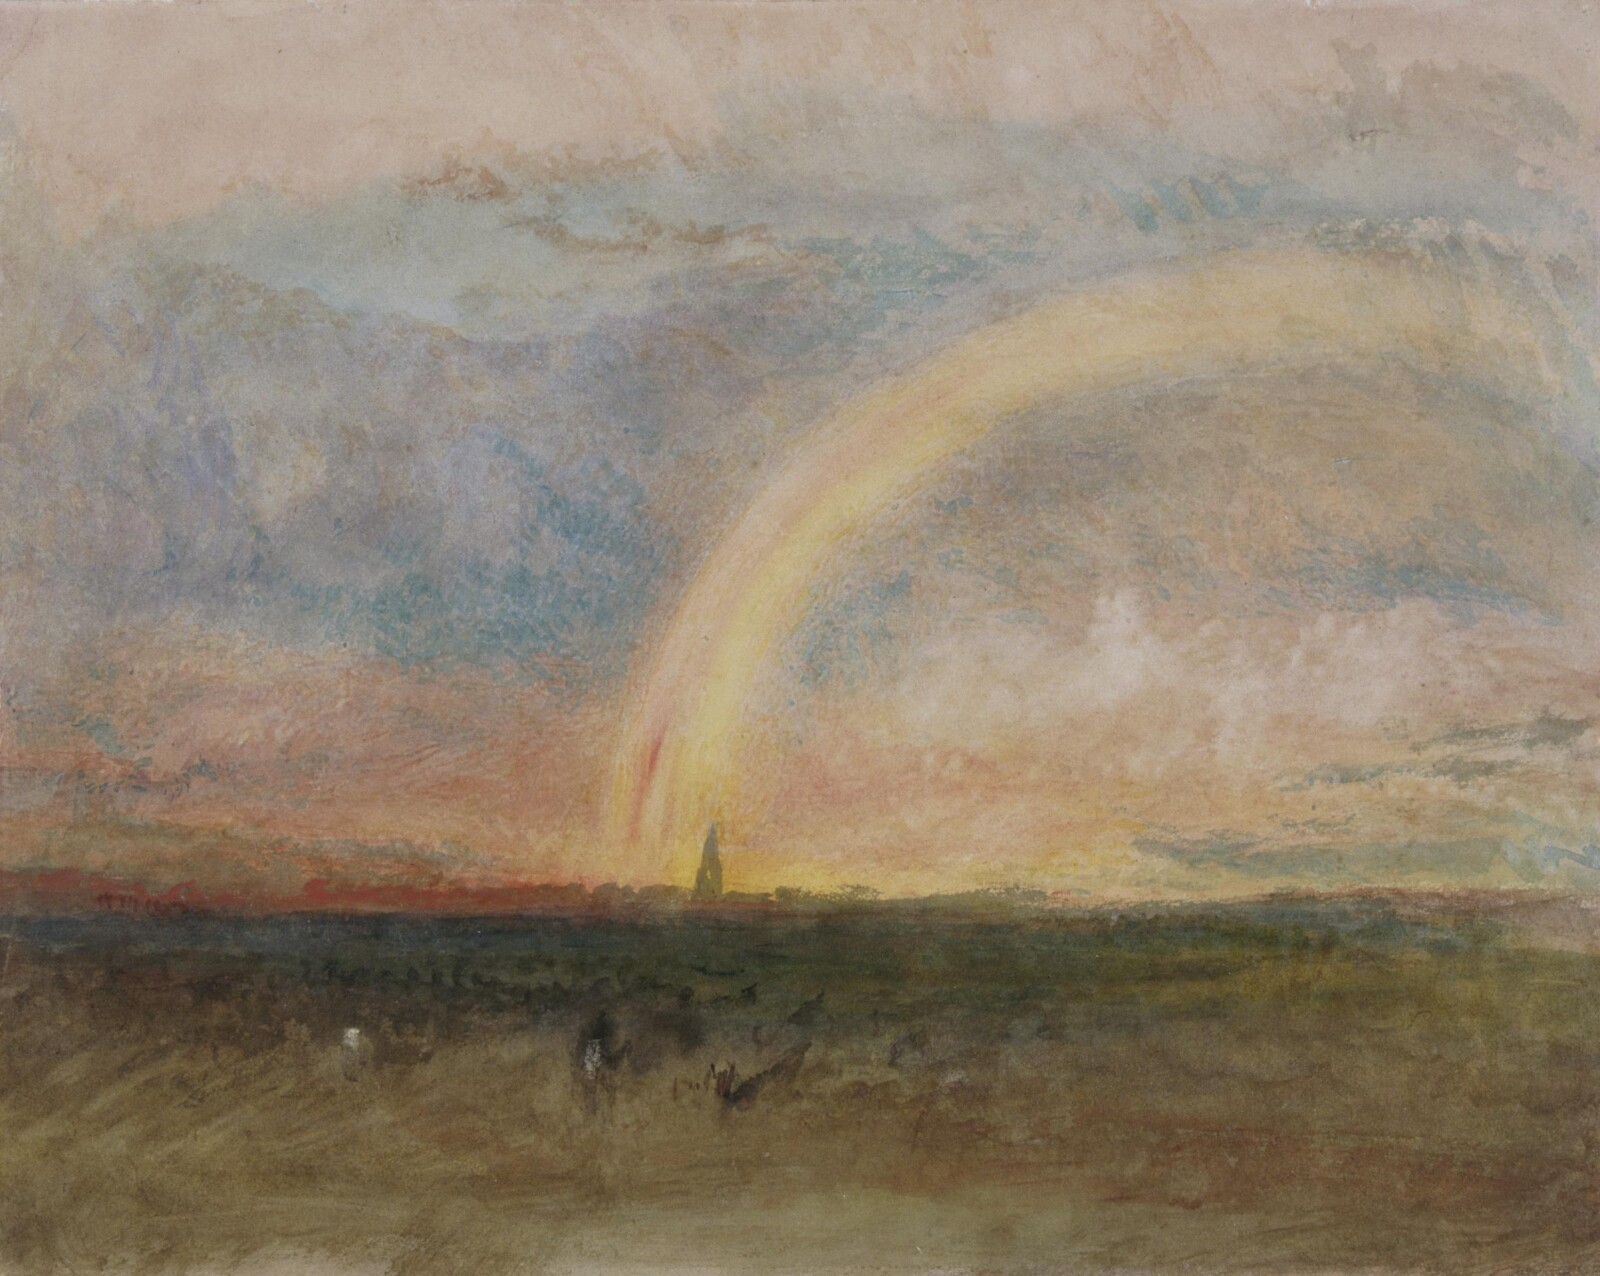 Watercolour painting showing a rainbow over a village with a high church spire